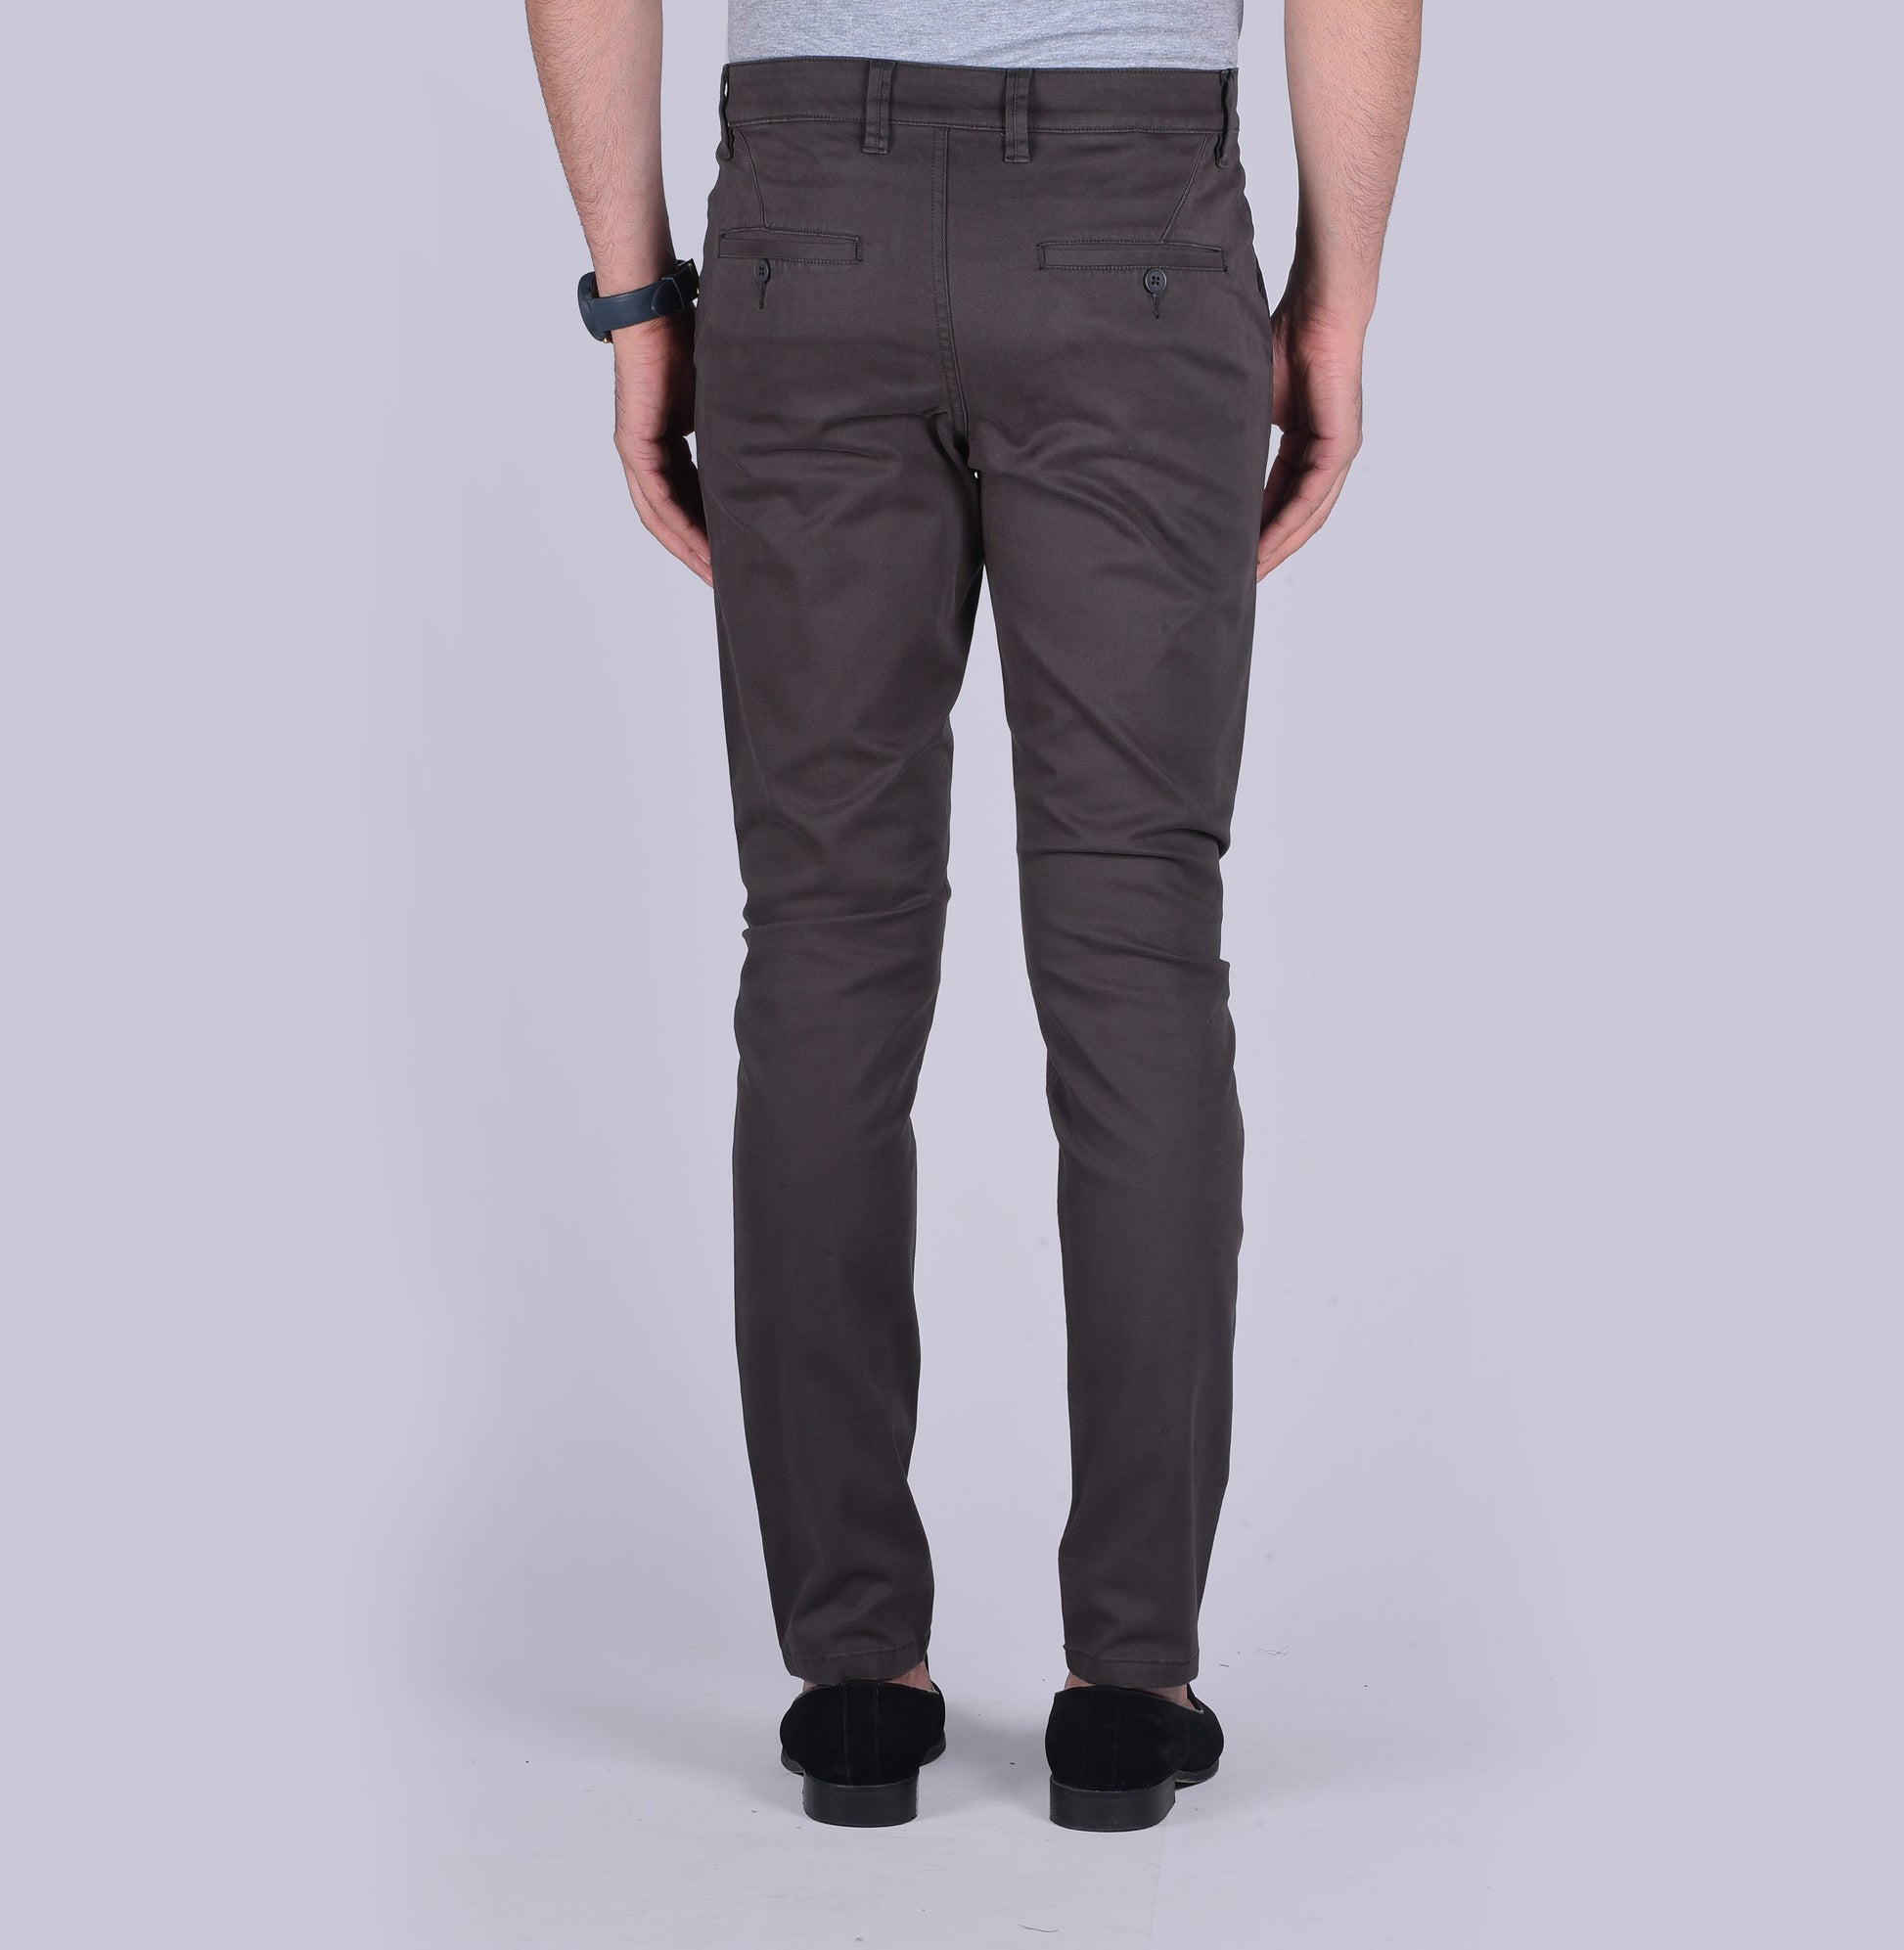 Dark grey contour fit trousers. - urban clothing co.